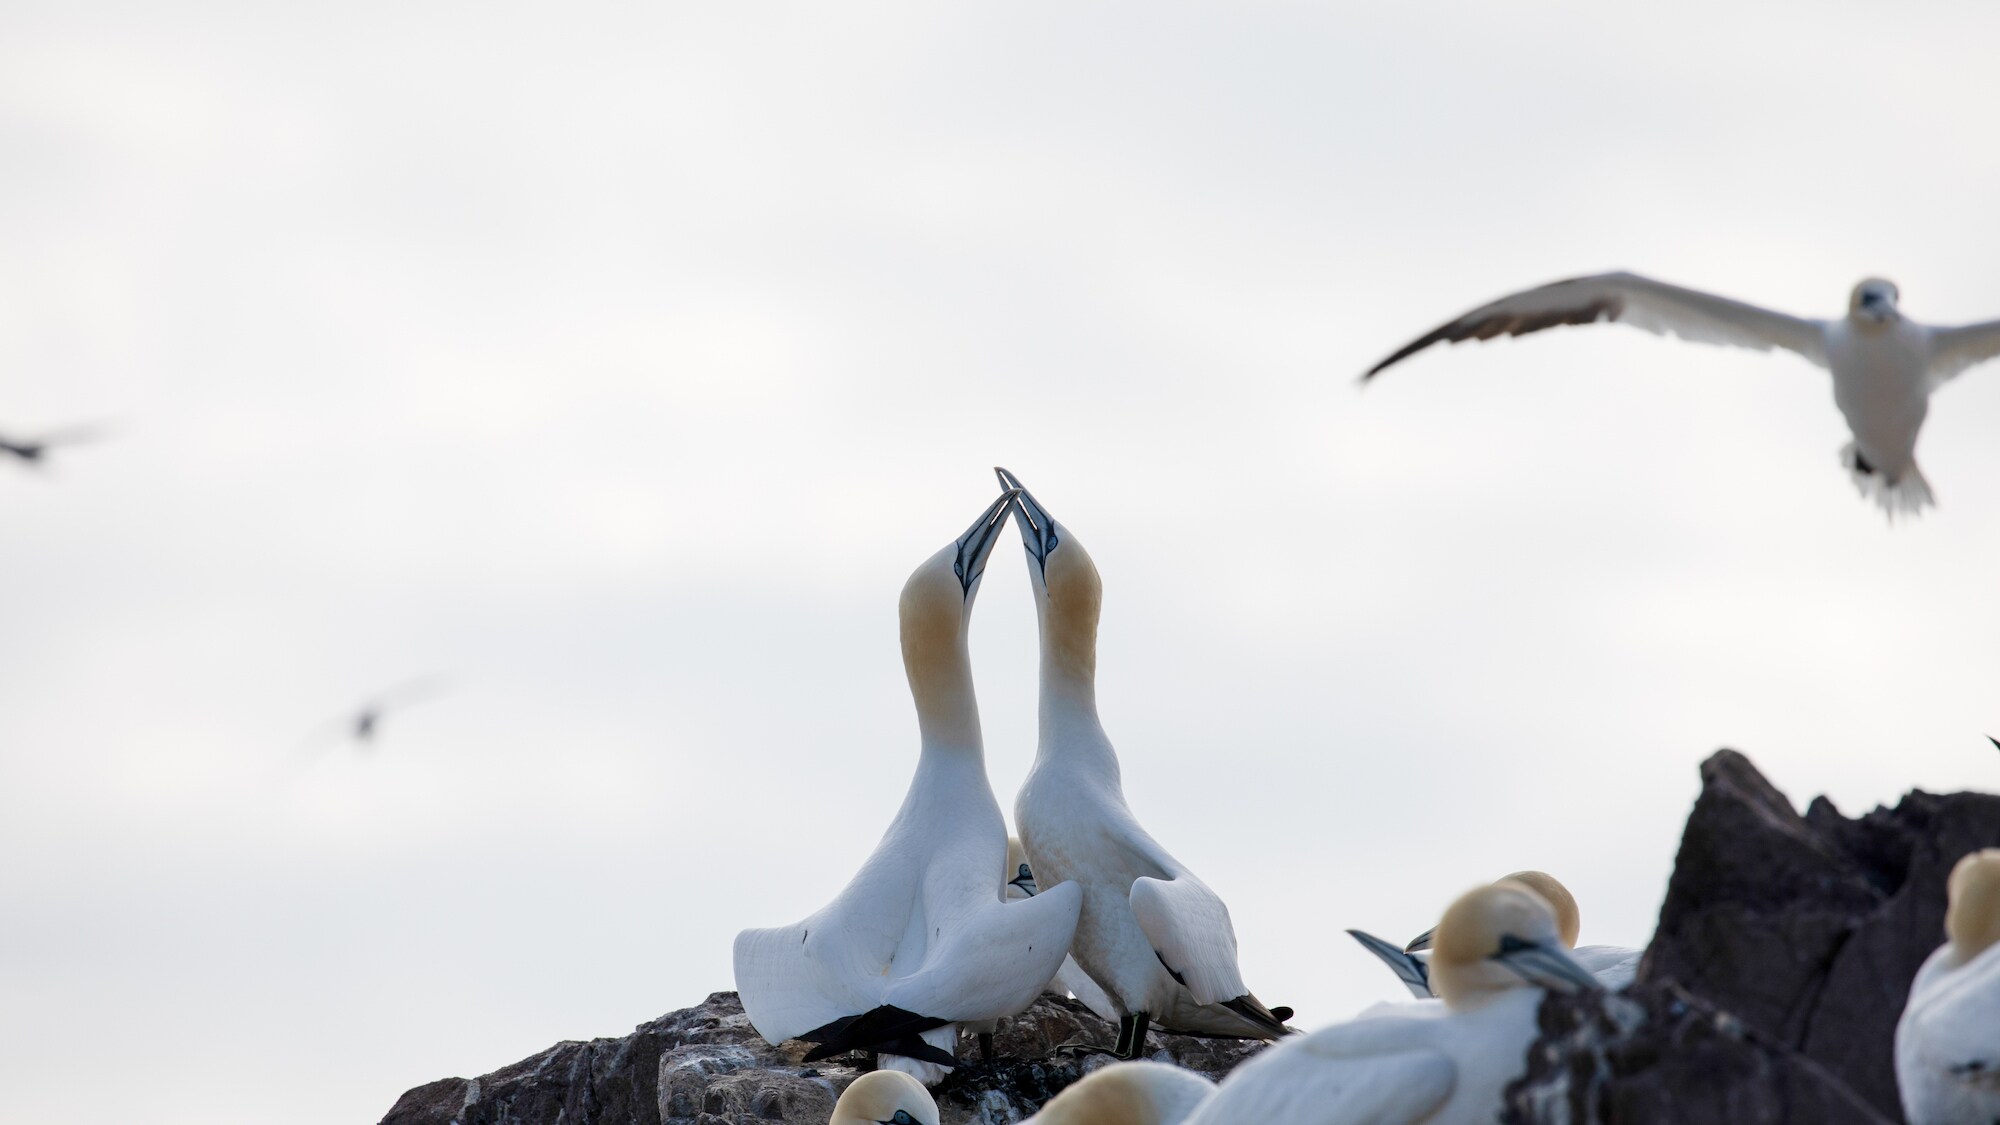 Two northern gannets greet each other with a ritualistic beak rubbing.  (photo credit:  National Geographic for Disney+/Jonjo Harrington)